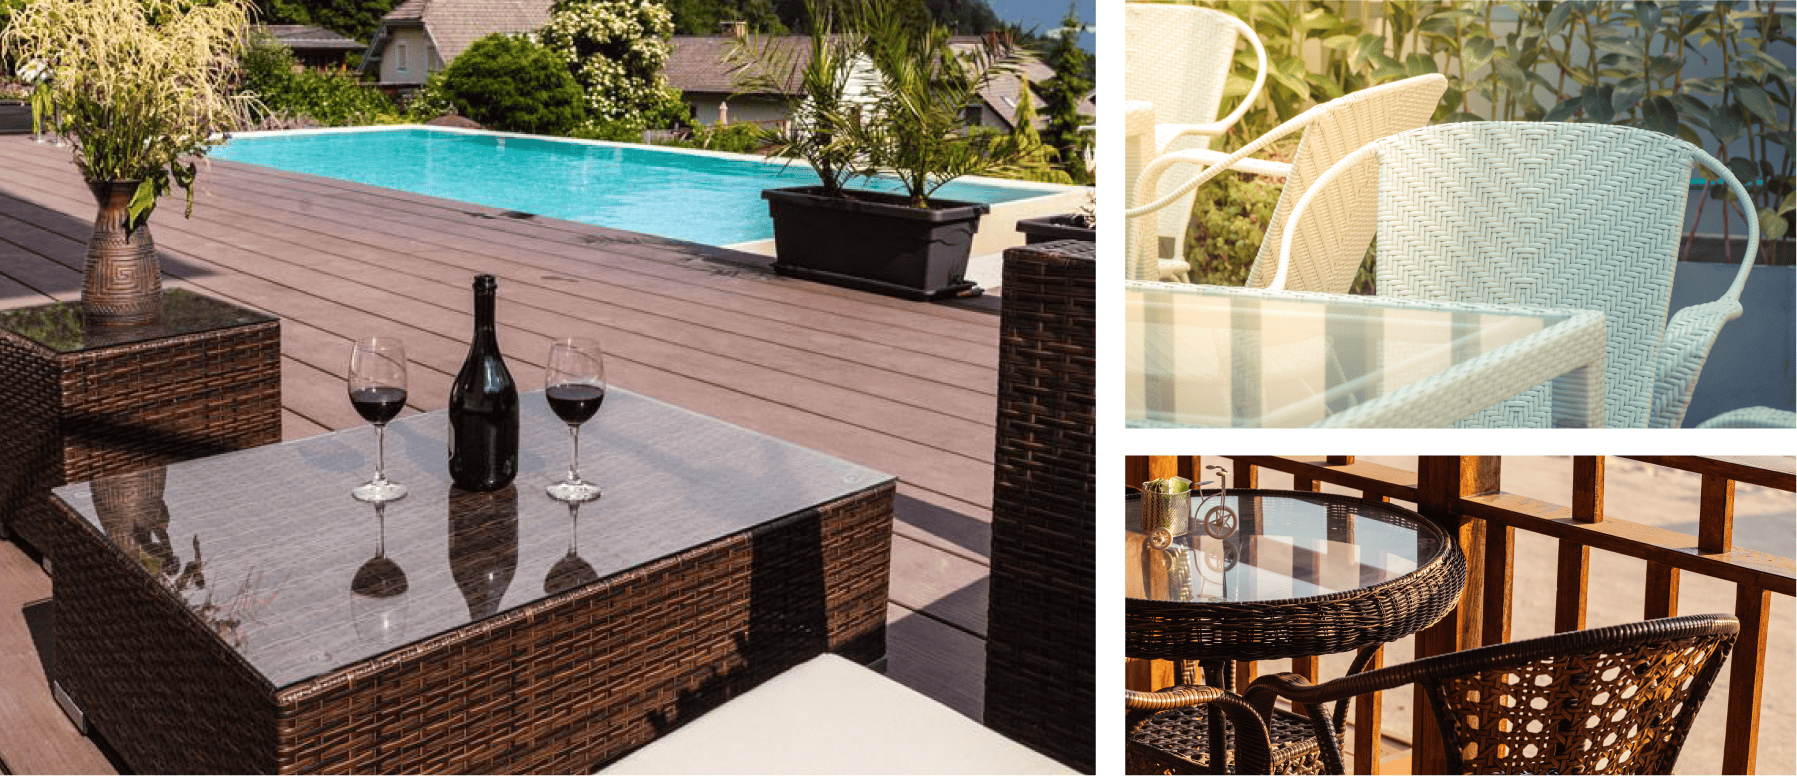 An enticing montage showcasing a pool, stylish patio furniture, and a wine glass, creating a perfect ambiance.